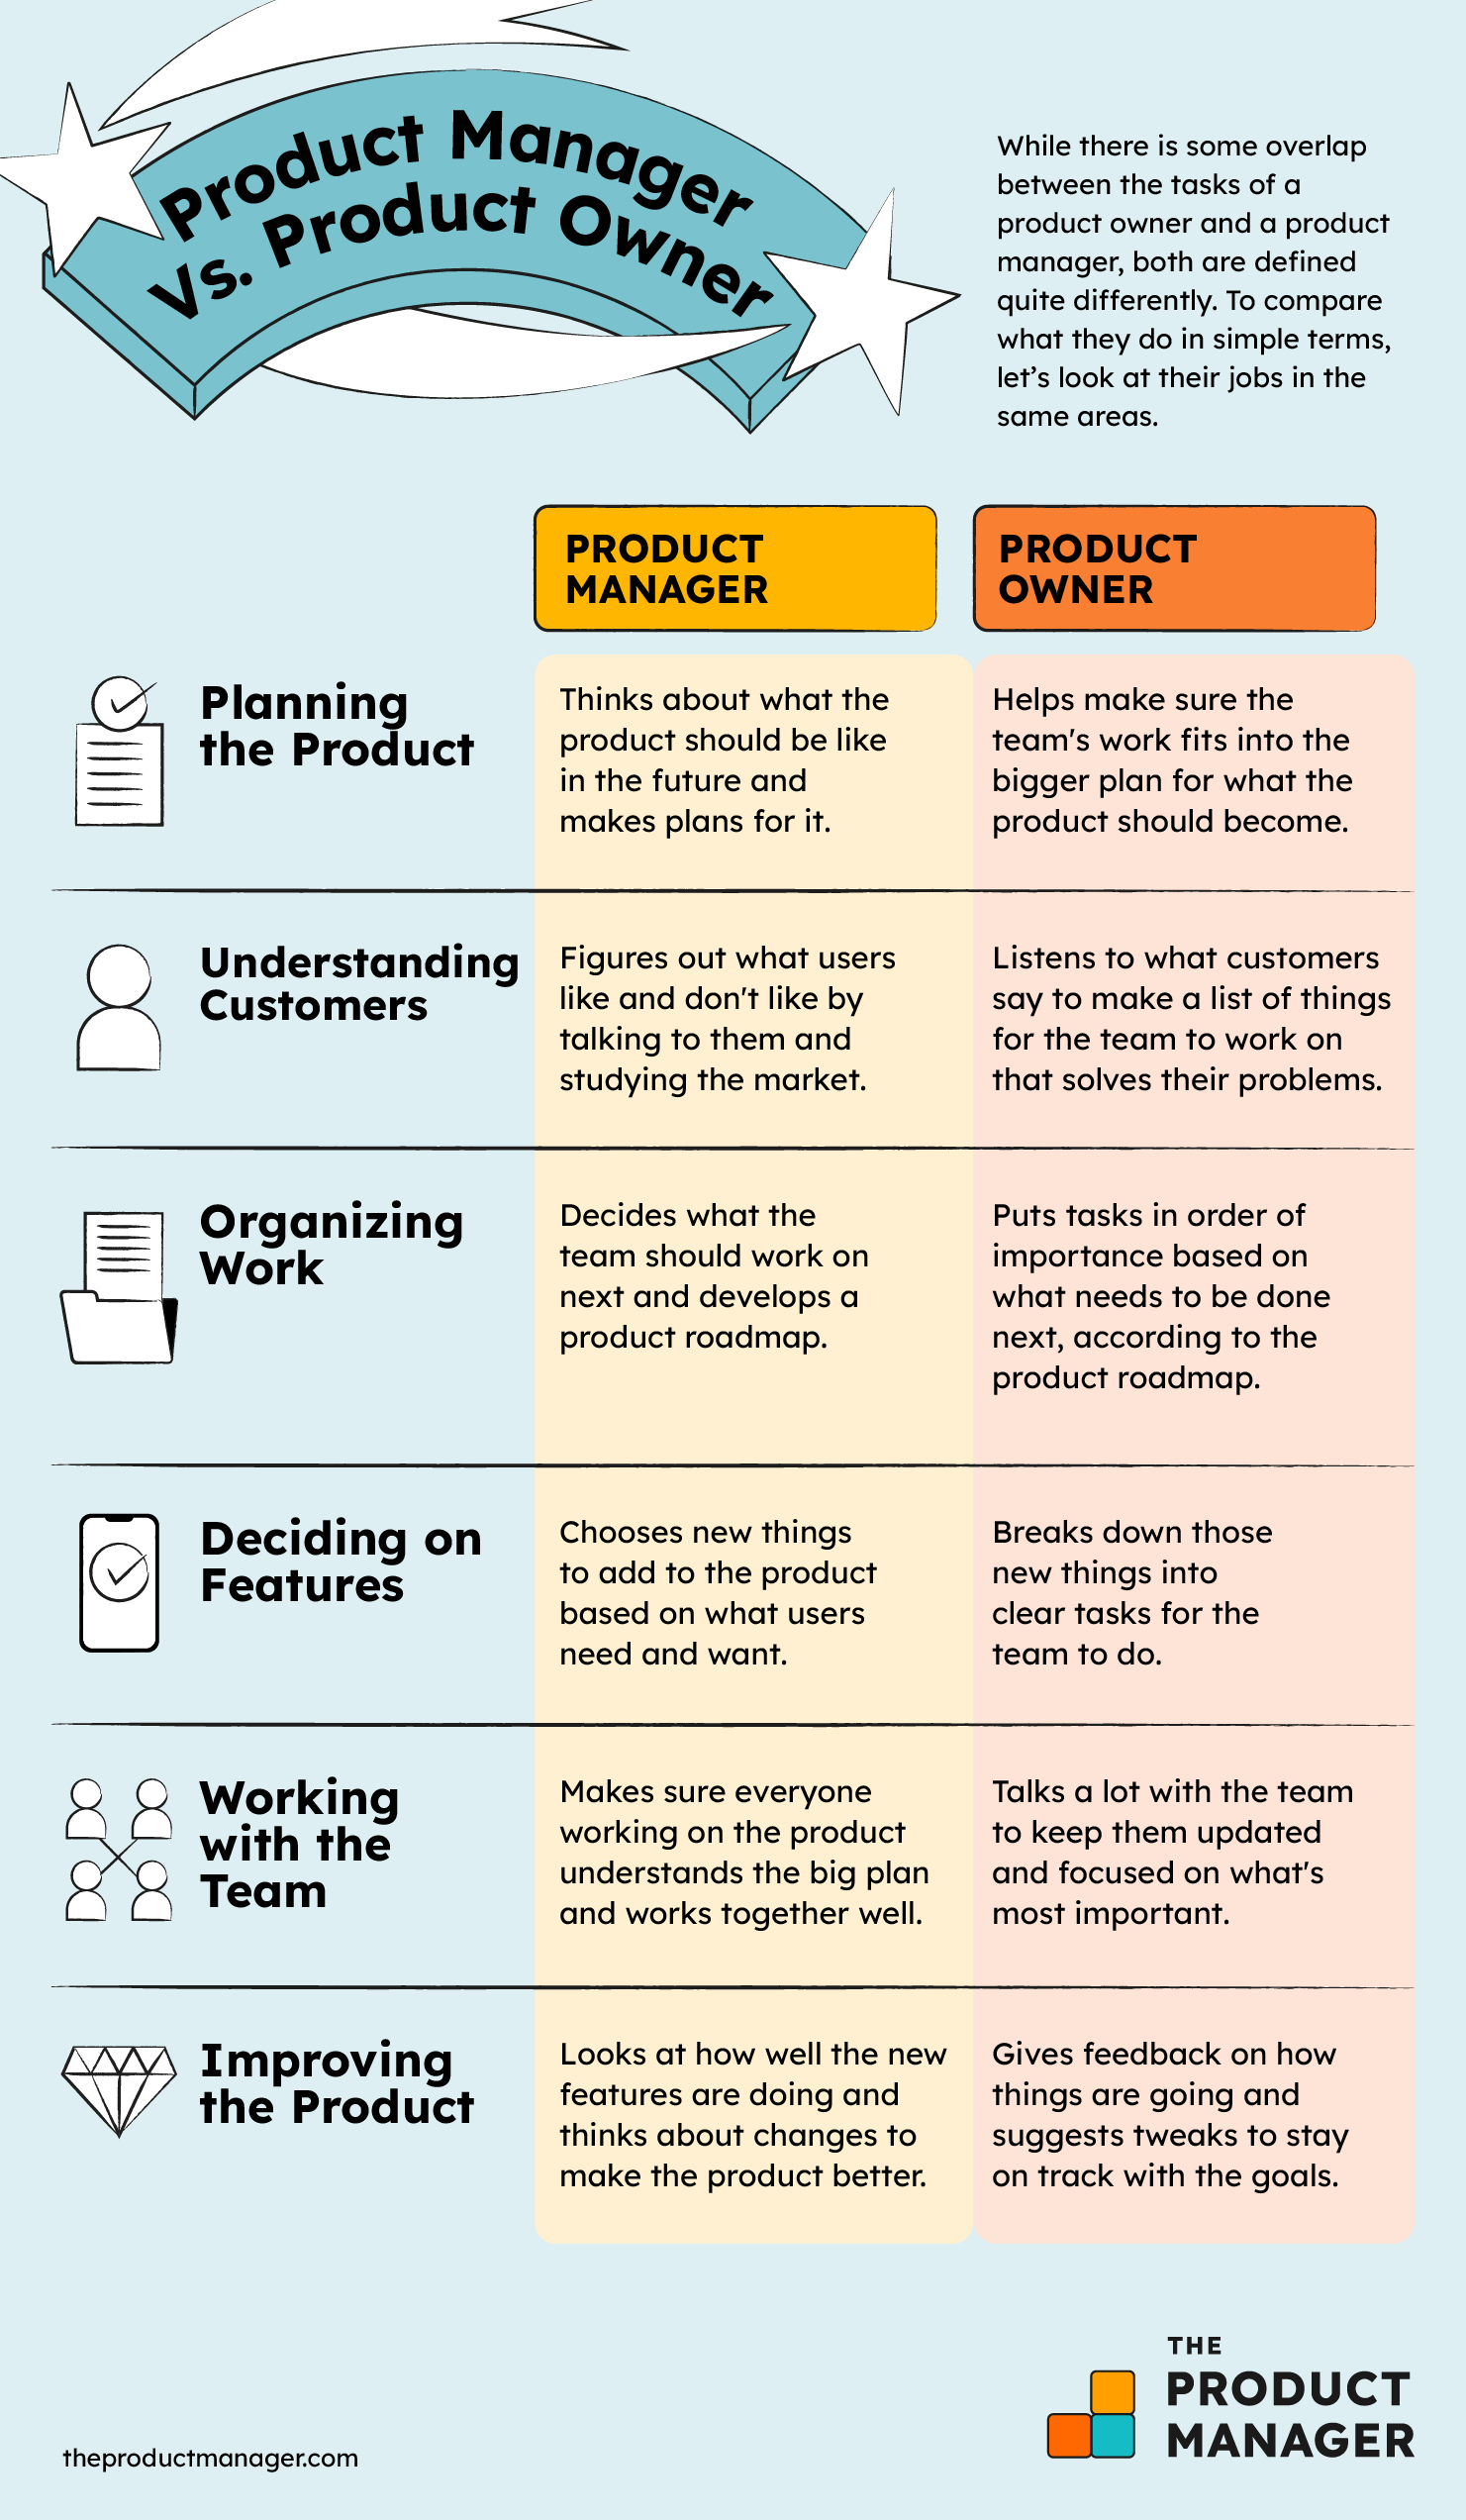 A comparison between product managers and product owners in the areas of product planning, understanding customers, organizing work, deciding on features, working with the team, and improving the product.